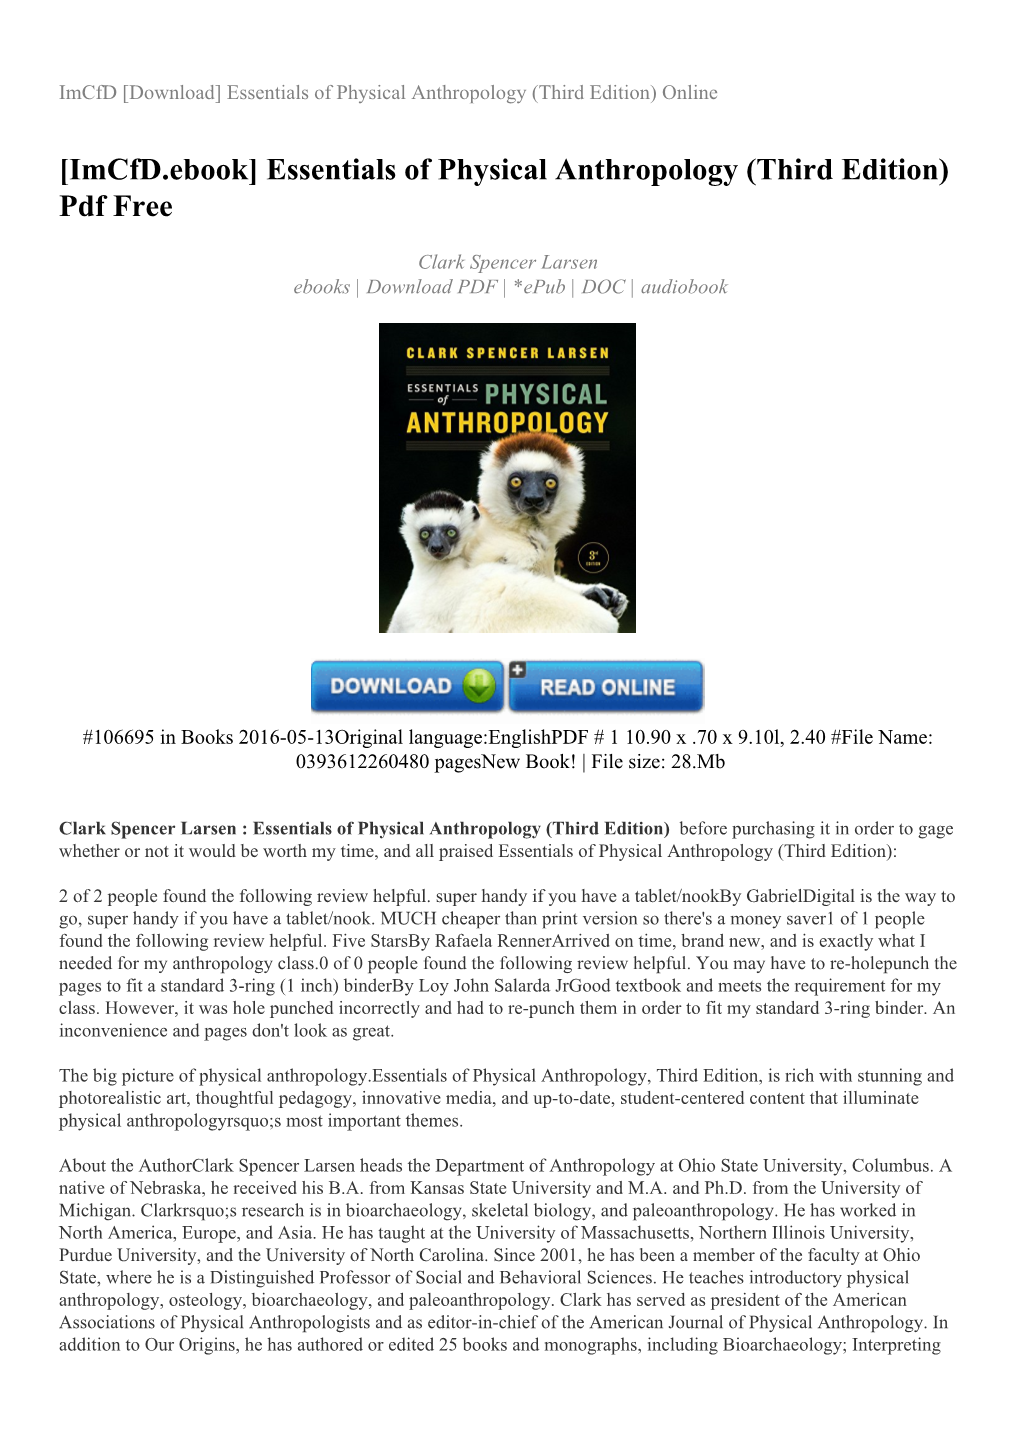 Essentials of Physical Anthropology (Third Edition) Online